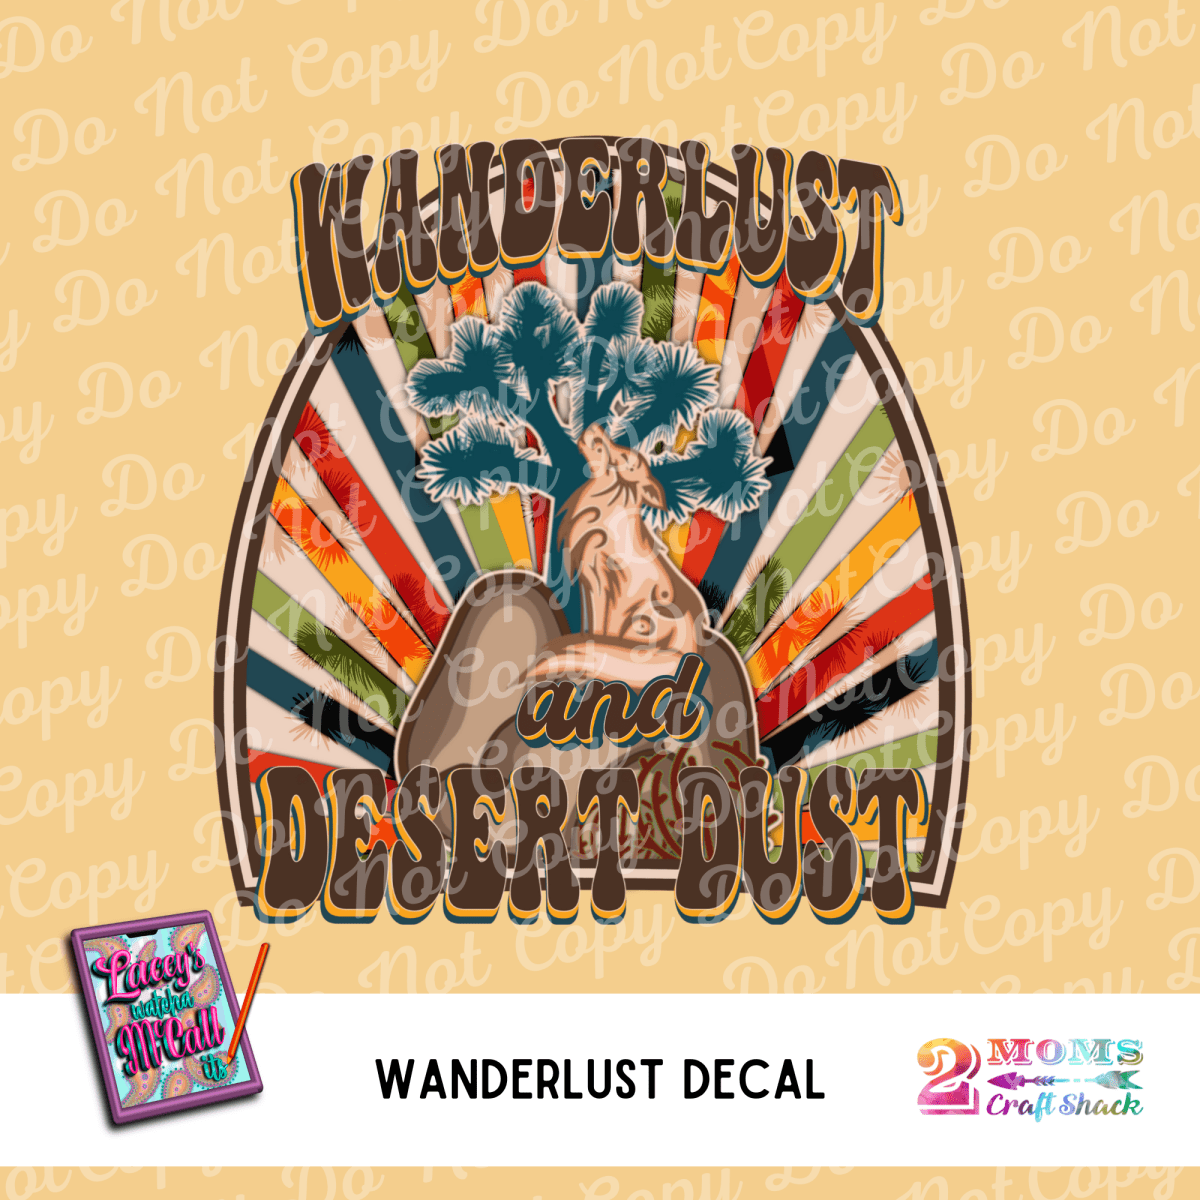 WANDERLUST AND DESERT DUST DECAL - ADHESIVE